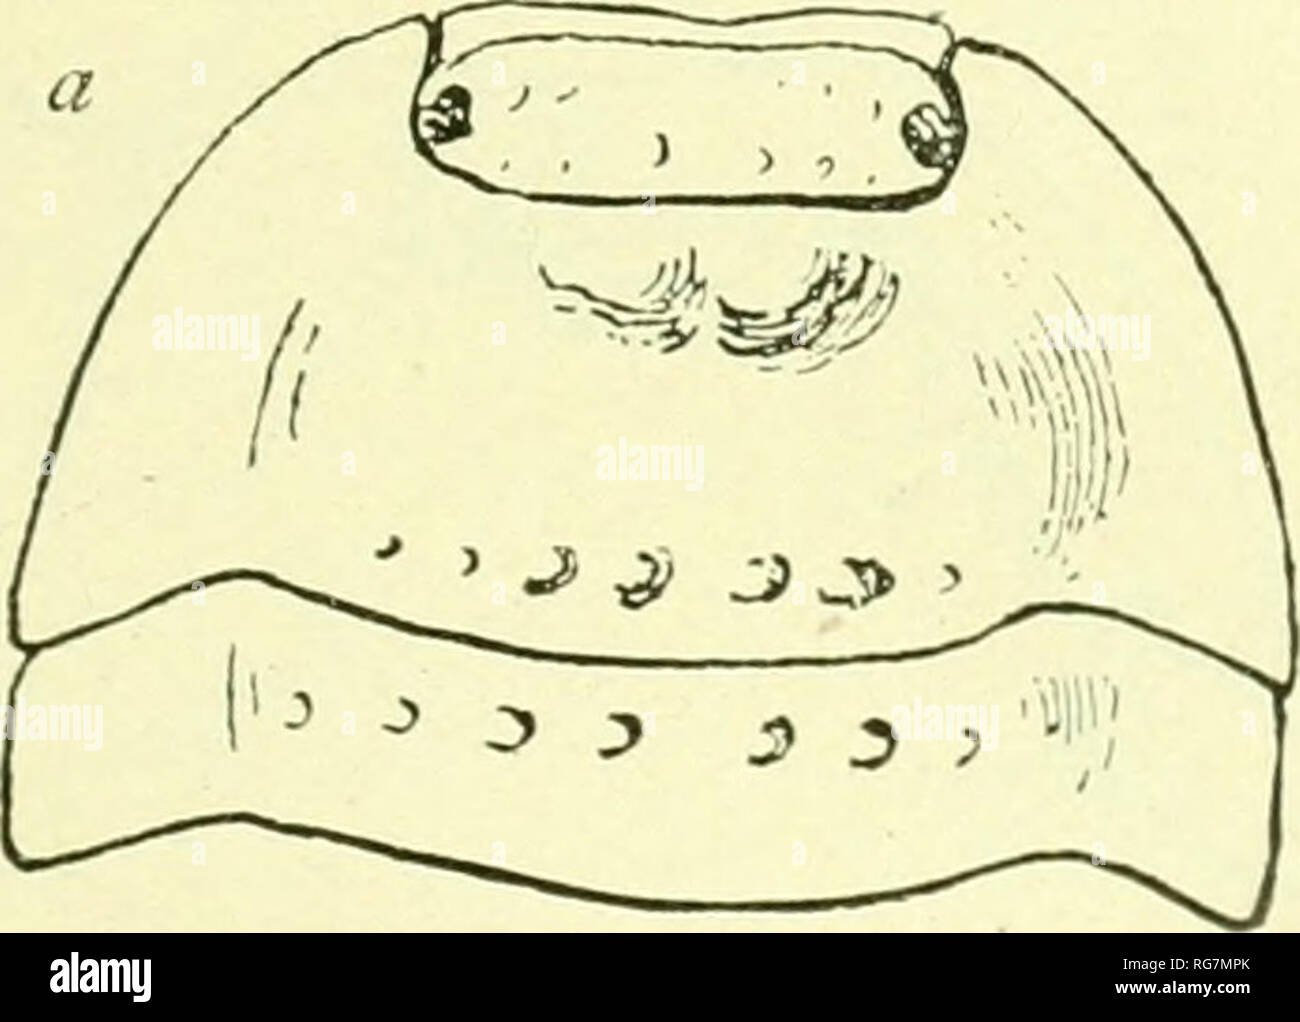 . Bulletin - United States National Museum. Science. TSOPODS OF NORTH AMERICA. 641 Loealifi/.—yLvLStique Ishind, West Indies. &quot;Beiitt'ii from brush.&quot;' &quot;Bod}&quot; rather wide, moderutely convex, sliohtly tuhercuhiled on the pereion. Cephalon: prellum twice as short as the second. Pereion: first seoment with two antero-median rounded tul)ercles; lateral edges slightly raised; coxopodite hardly perceptible, as a very small process below the leg. Second segment without a distinct cox- opodite. Pleon, telson: pl(H)telson longer than wid(% smooth, with a mimite longitudinal wrinkle n Stock Photo